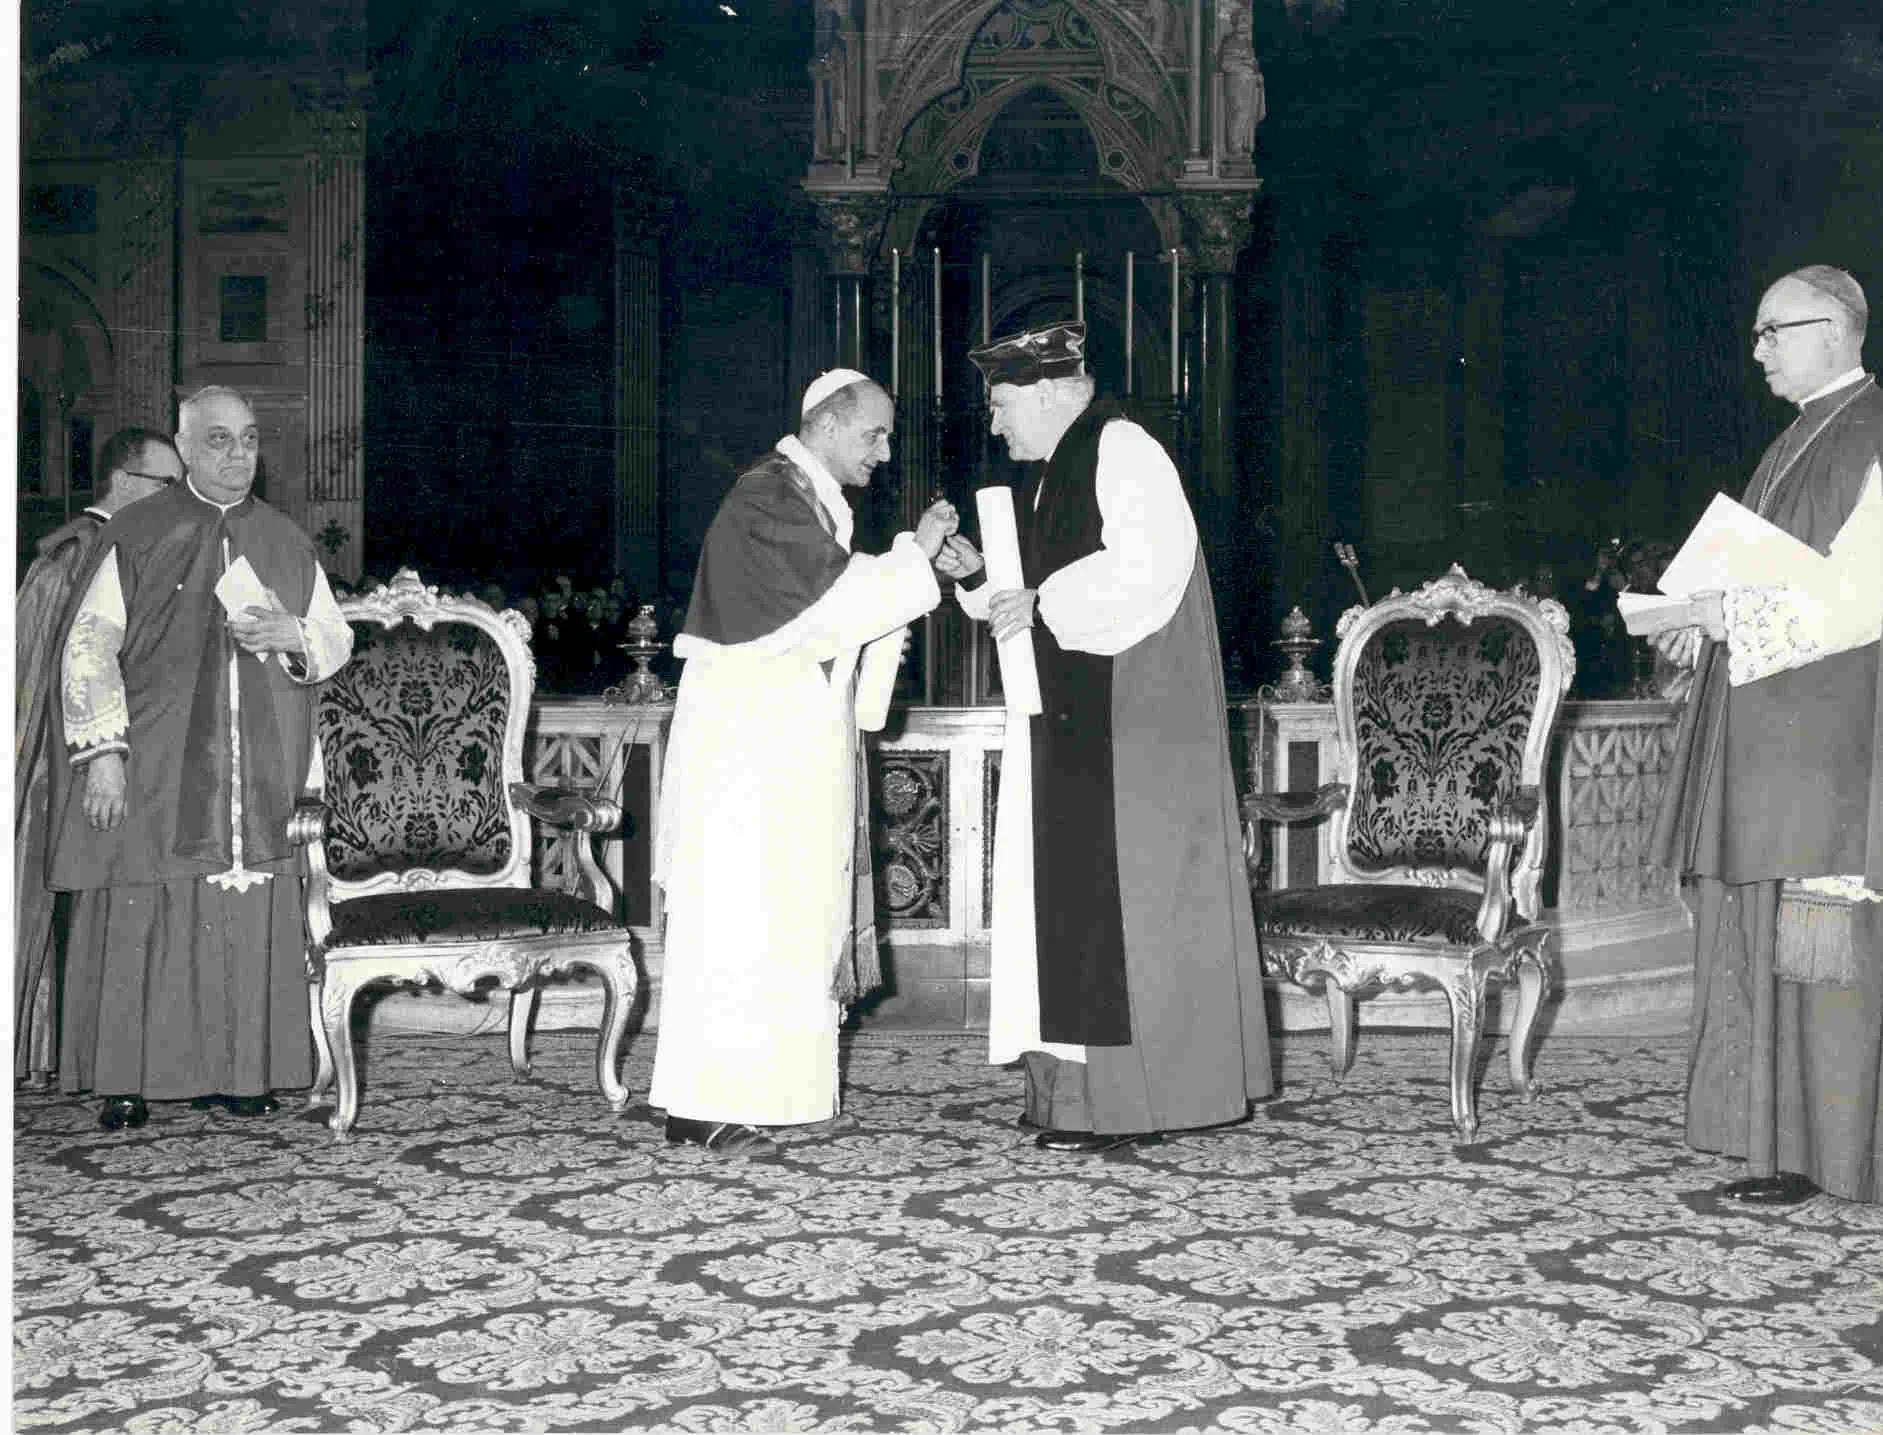 Archbishop Michael Ramsey and Pope Paul VI holding copies of their Common Declaration